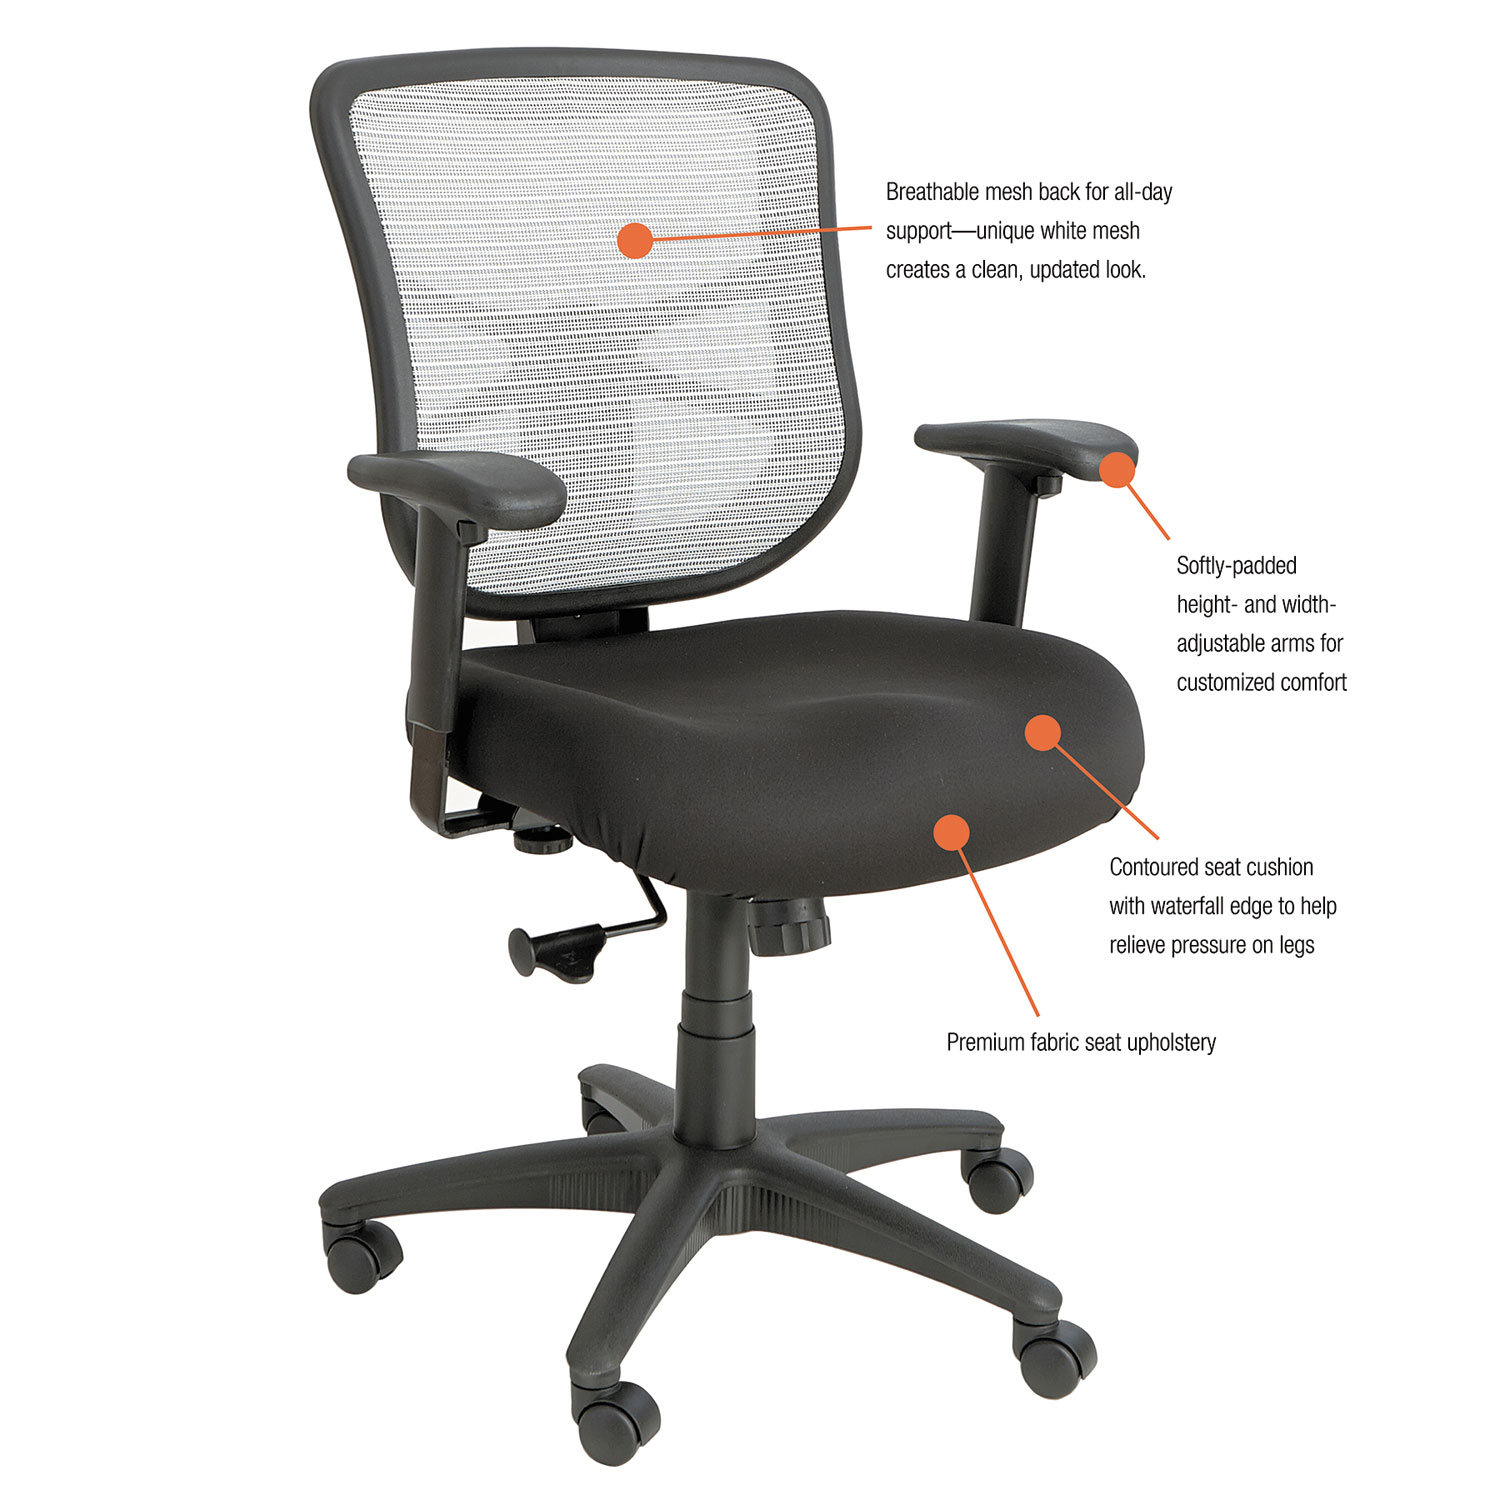 How To Clean Office Chair Mesh : How To Clean Office Mesh Chair : If